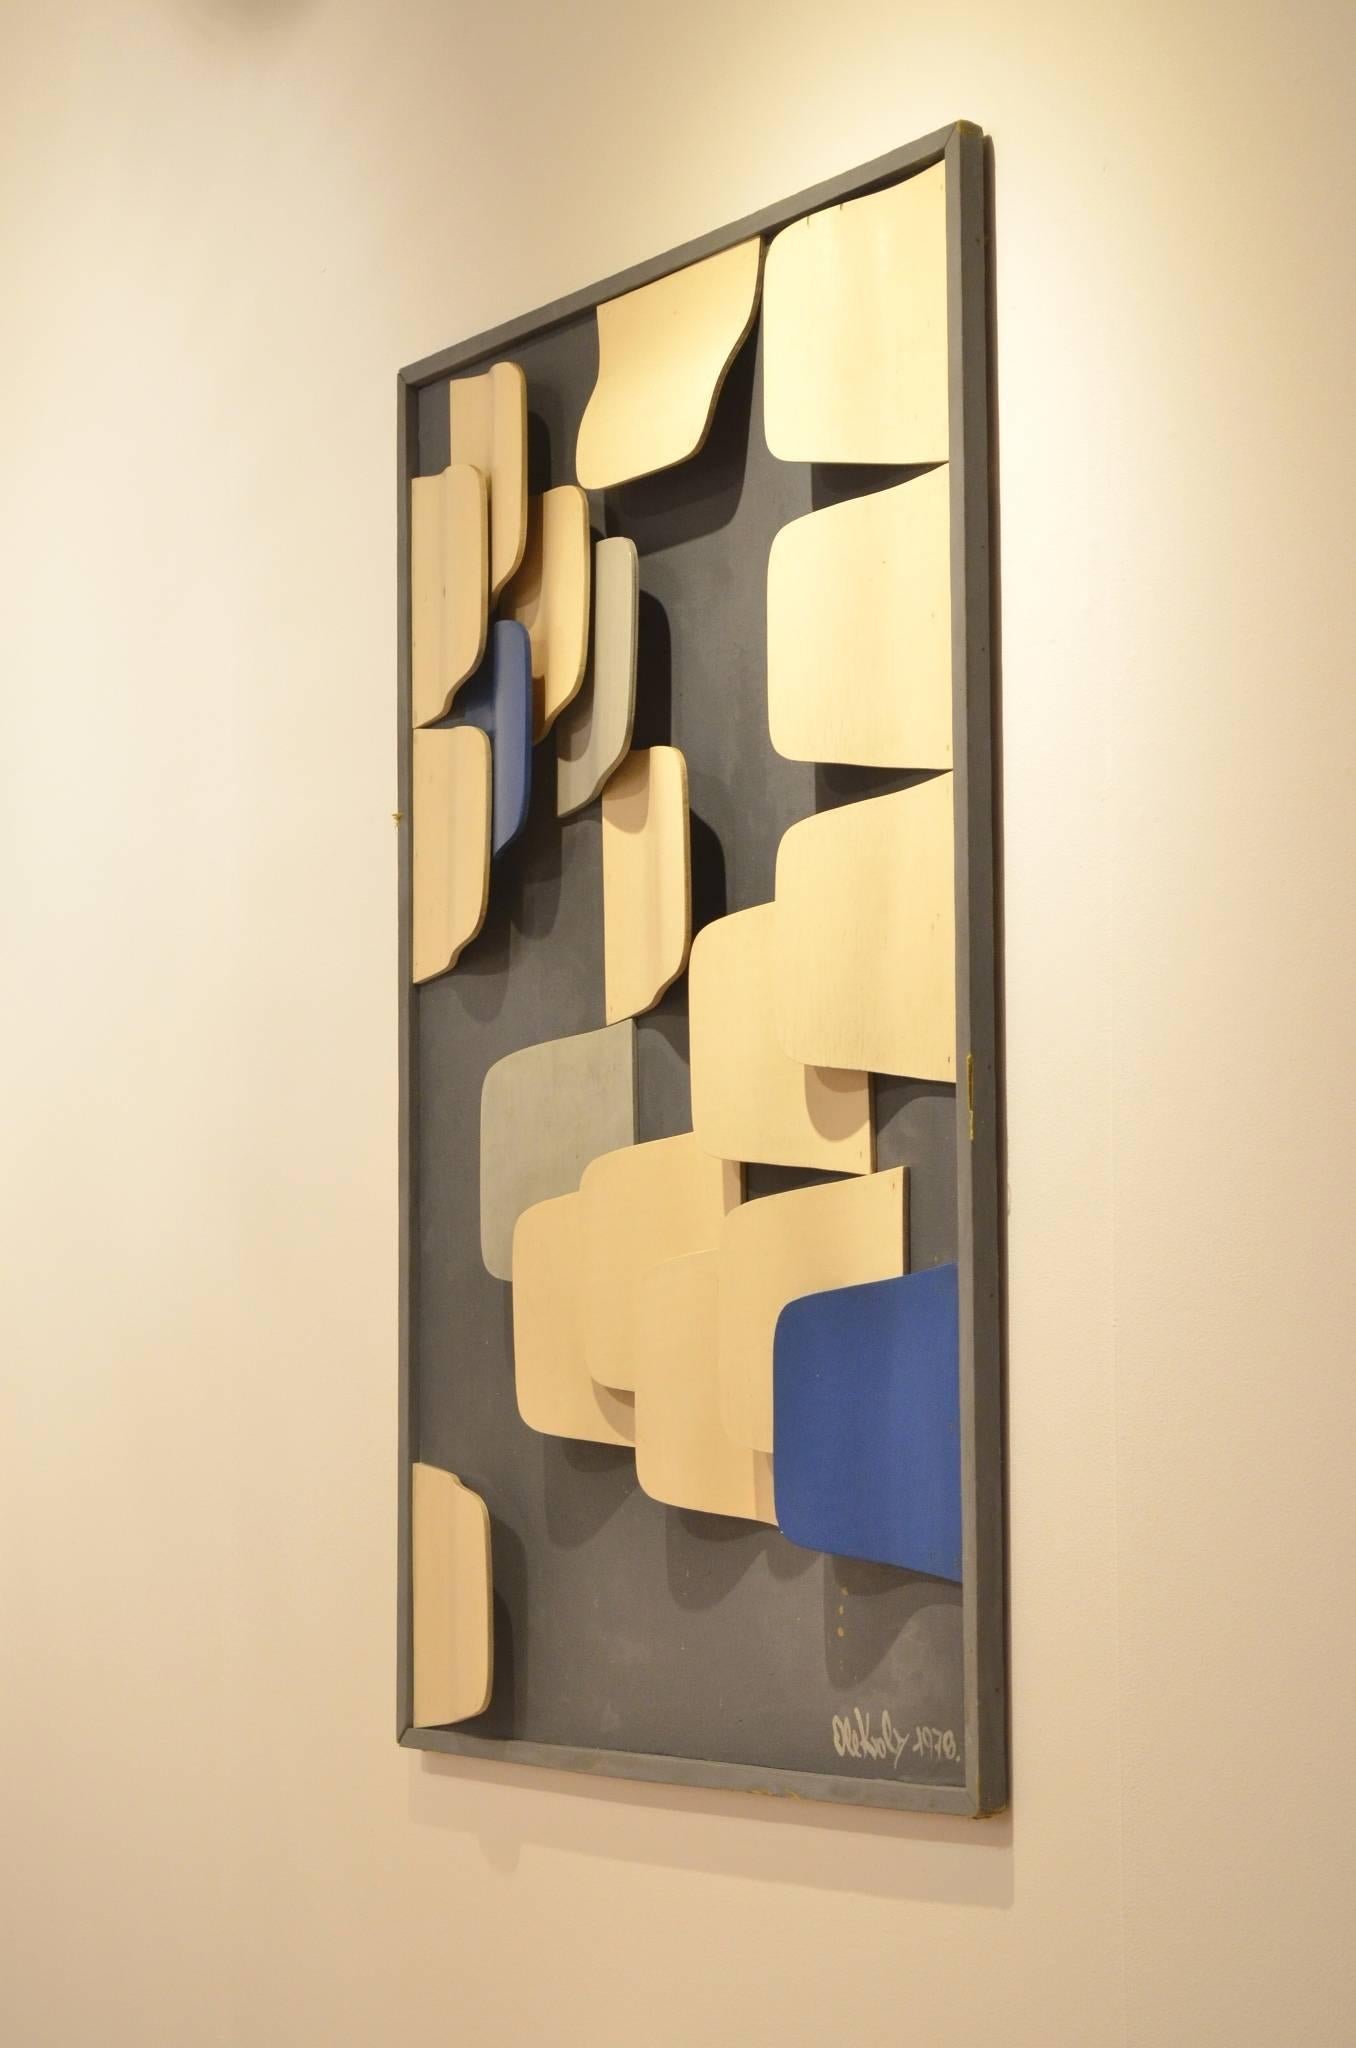 Structural Op Art inspired art work created in 1976.

It is composed of white, gray and Klein blue painted curved wooden slats. The slats are superimposed on one another, with the alternating colors creating texture and depth. 

The piece is